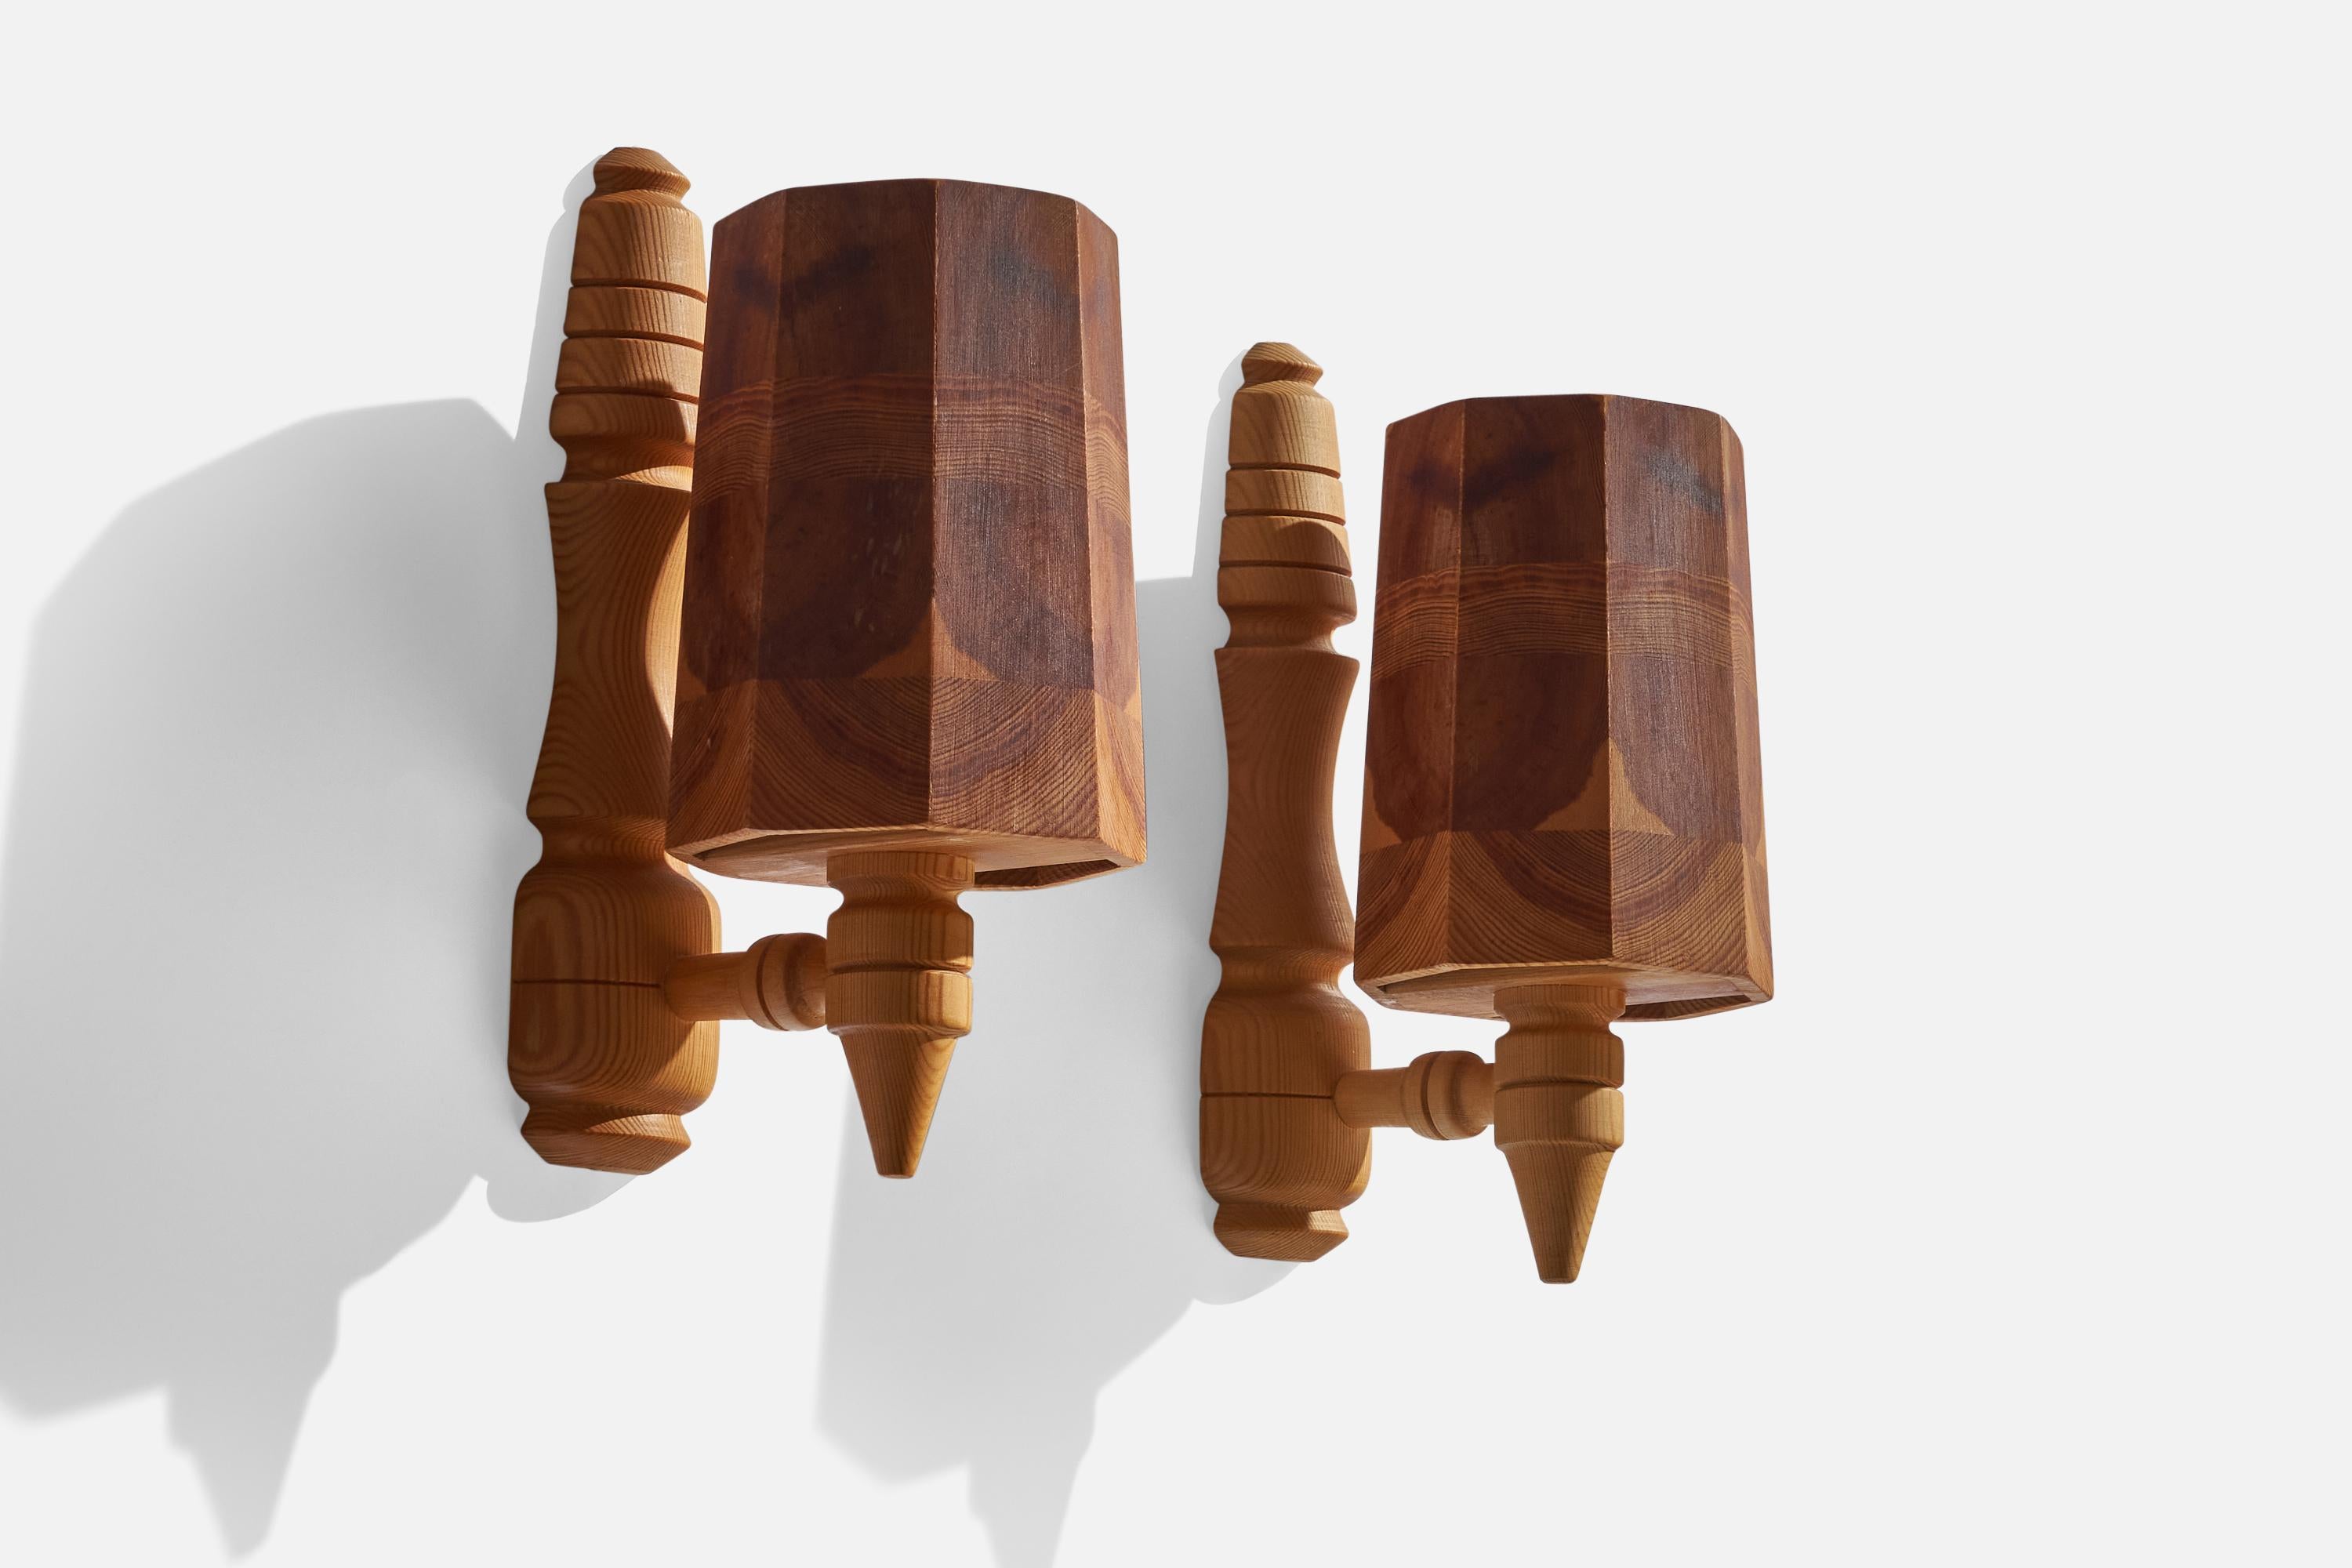 A pair of pine wall lights designed and produced in Sweden, 1970s.

Overall Dimensions (inches): 11.5” H x 5” W x 7” D
Back Plate Dimensions (inches): 11.25” H x 2.75” x 1.25” D
Bulb Specifications: E-14 Bulb
Number of Sockets: 2
All lighting will